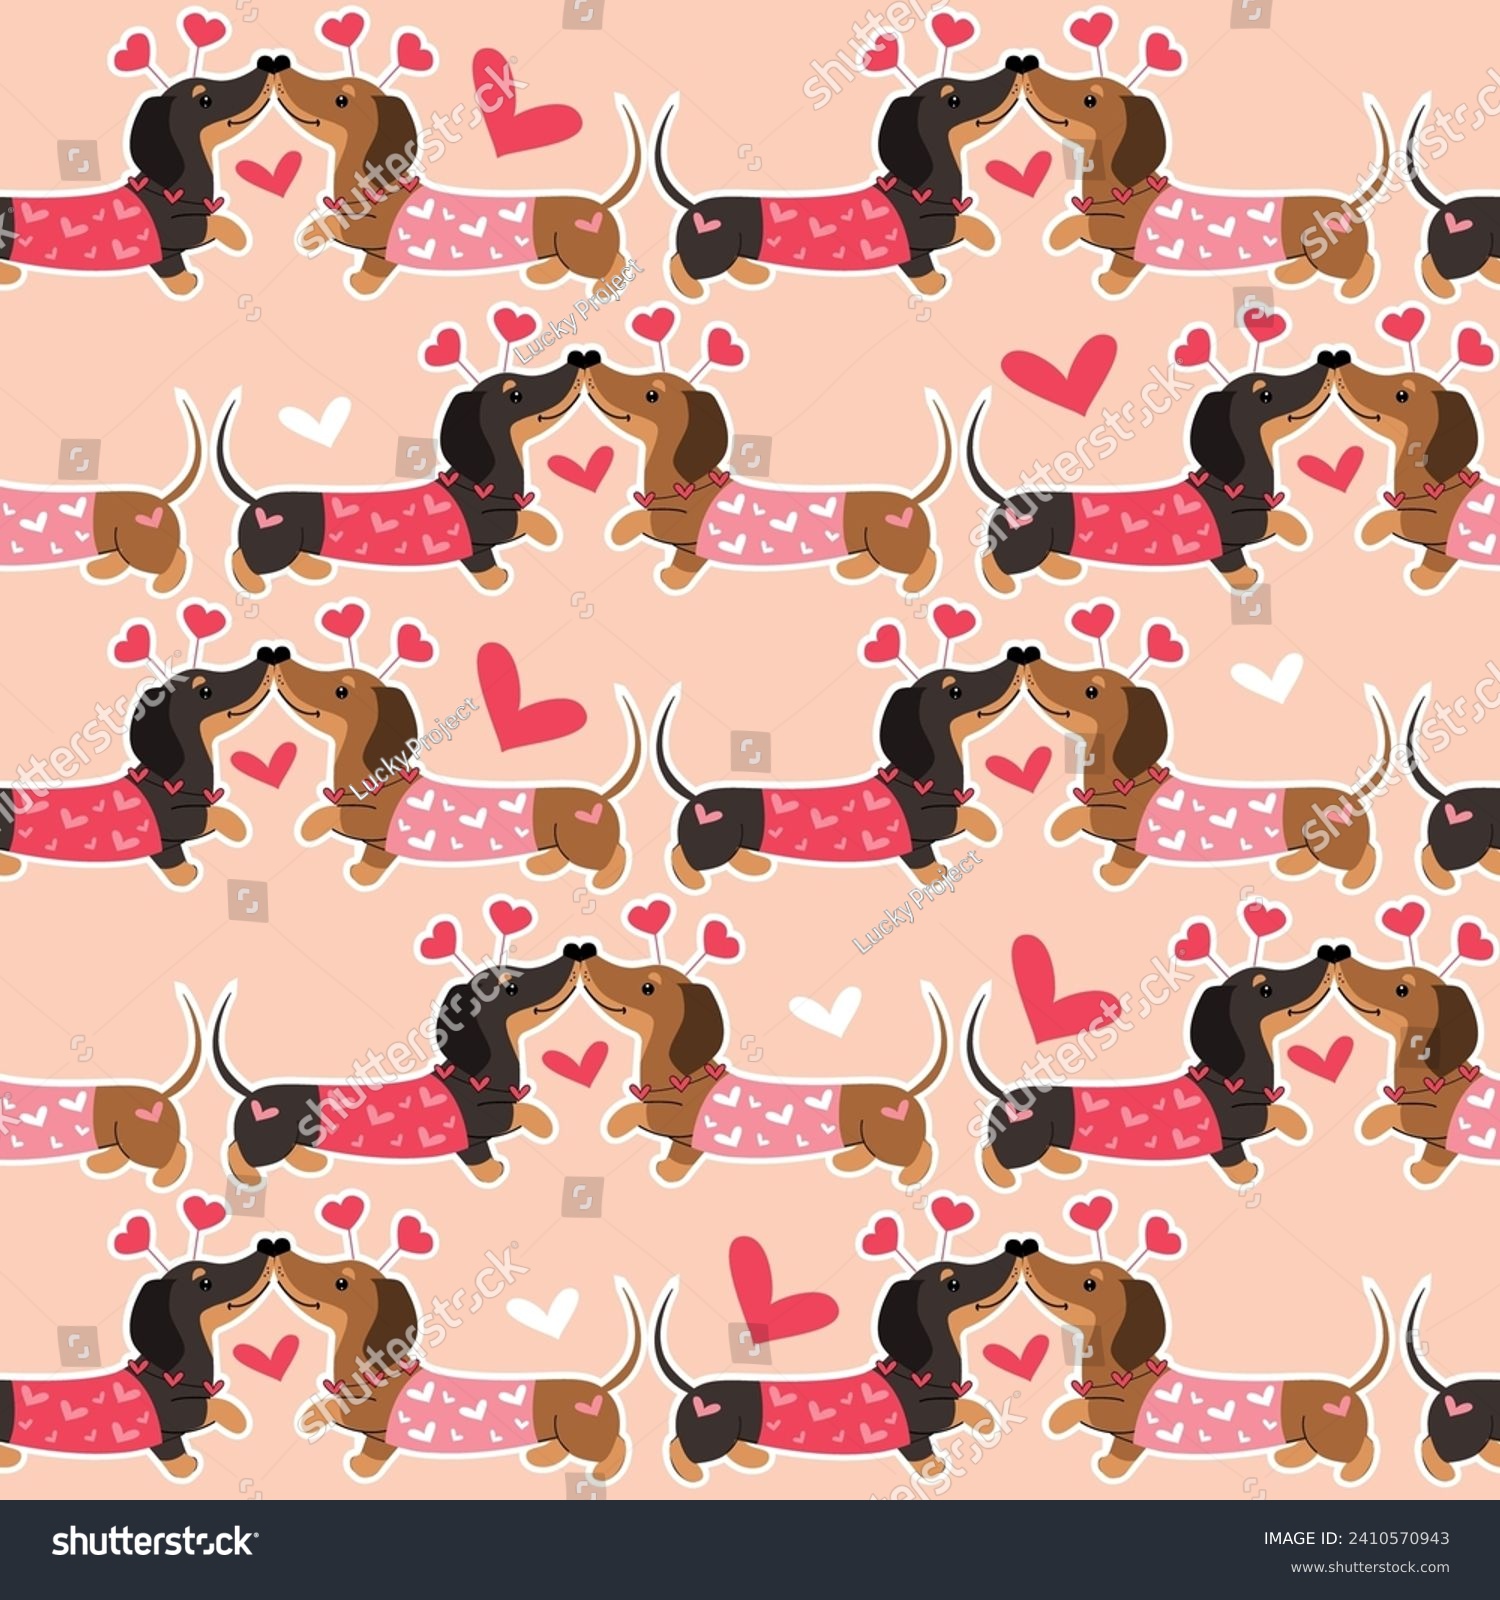 SVG of Love dachshund dogs and hearts on a pink background seamless pattern. Vector illustration doodle style. valentine's day card. Love animals svg